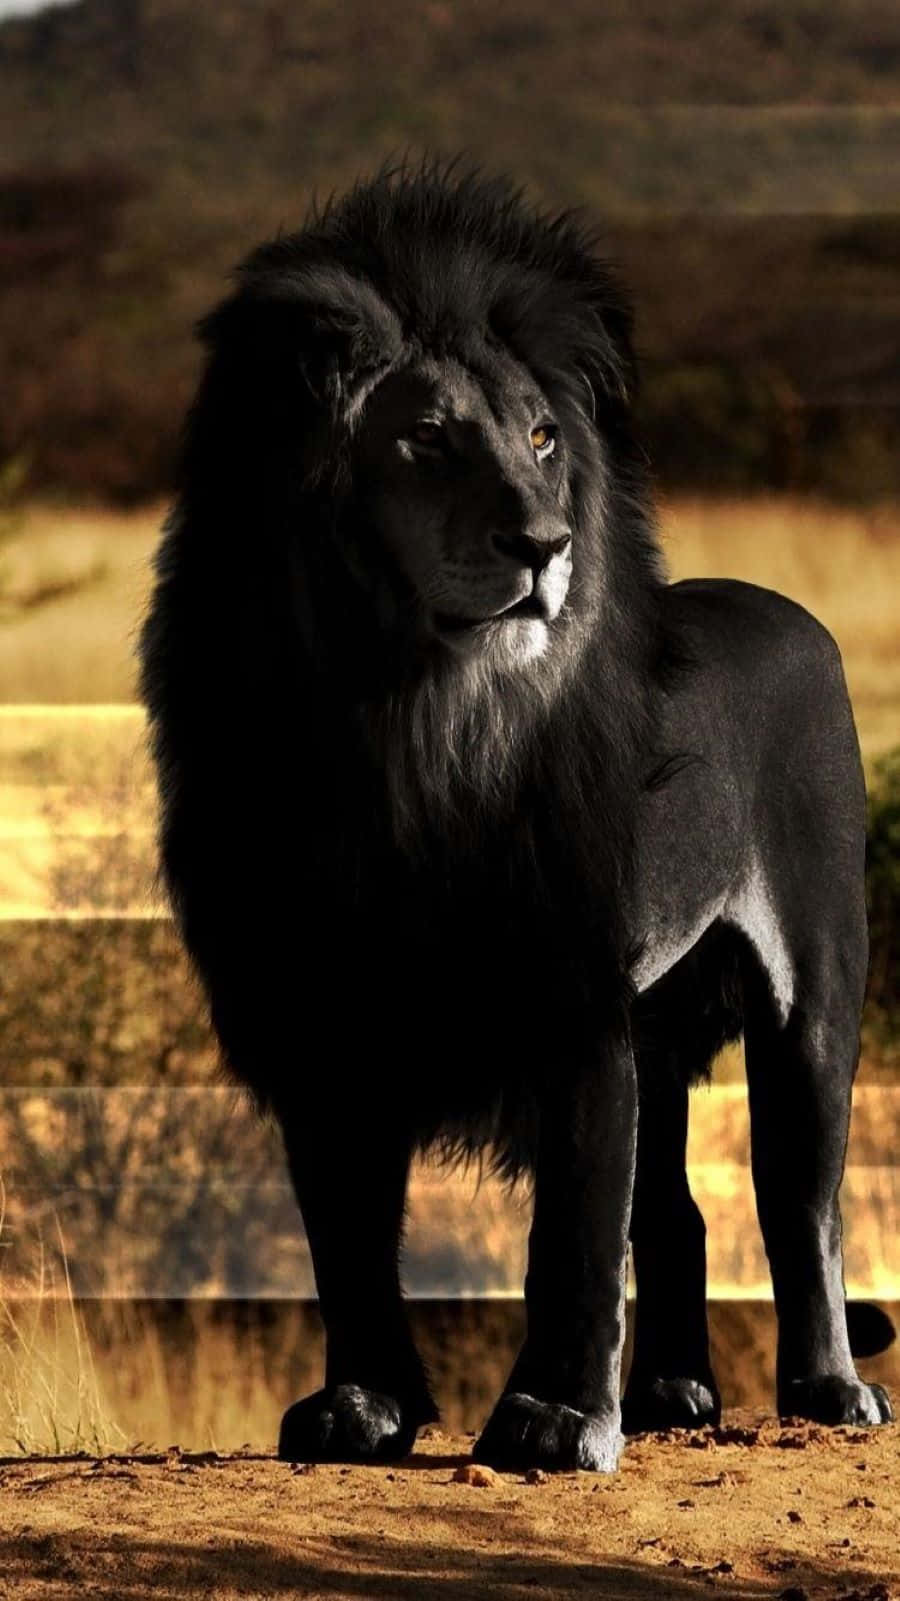 The Majesty of the Black Lion" Wallpaper